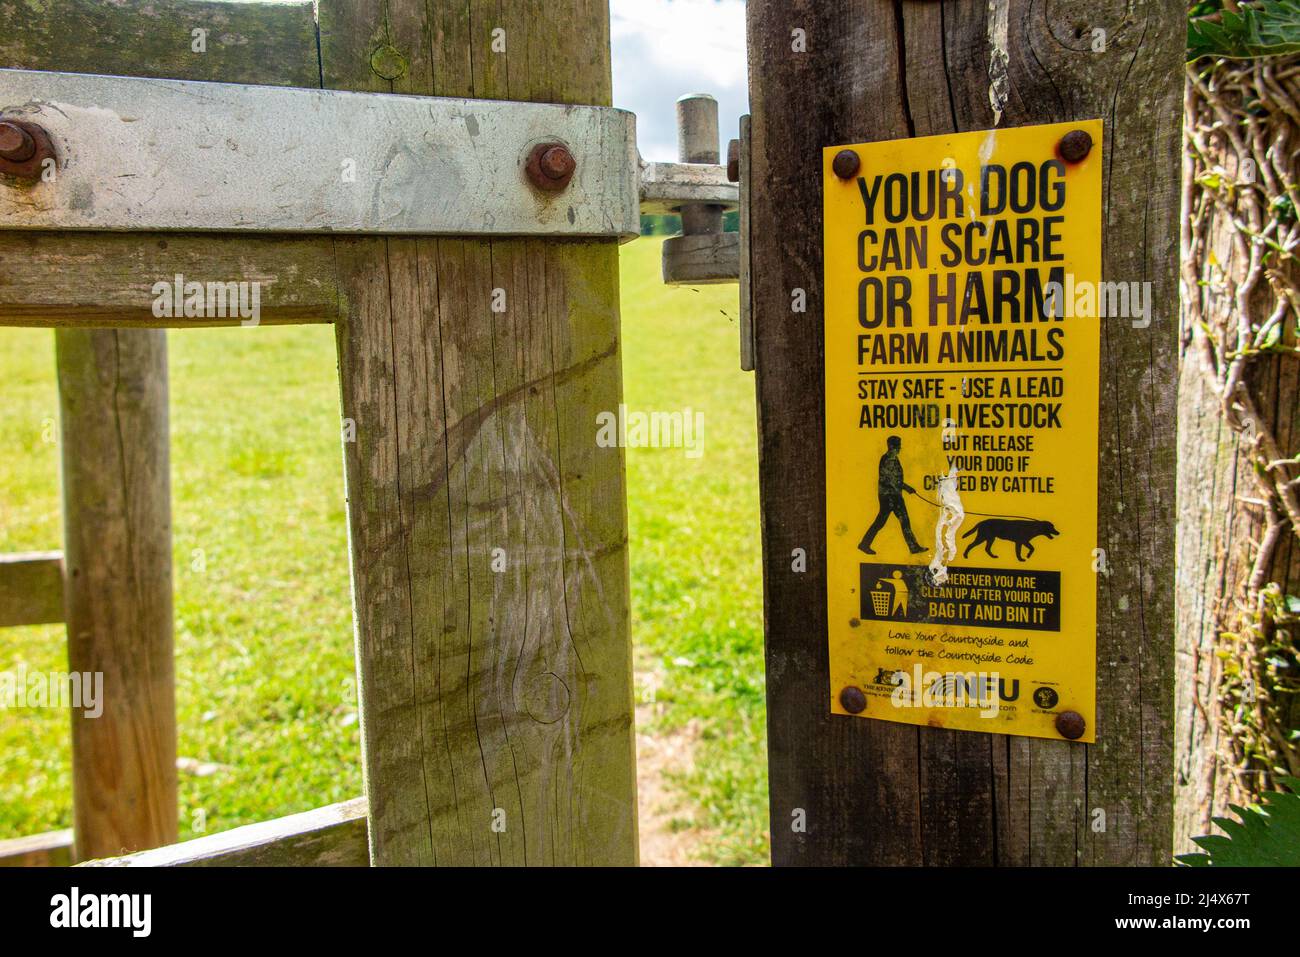 A sign in Oxfordhire warning that your dog can scare or harm farm animals Stock Photo